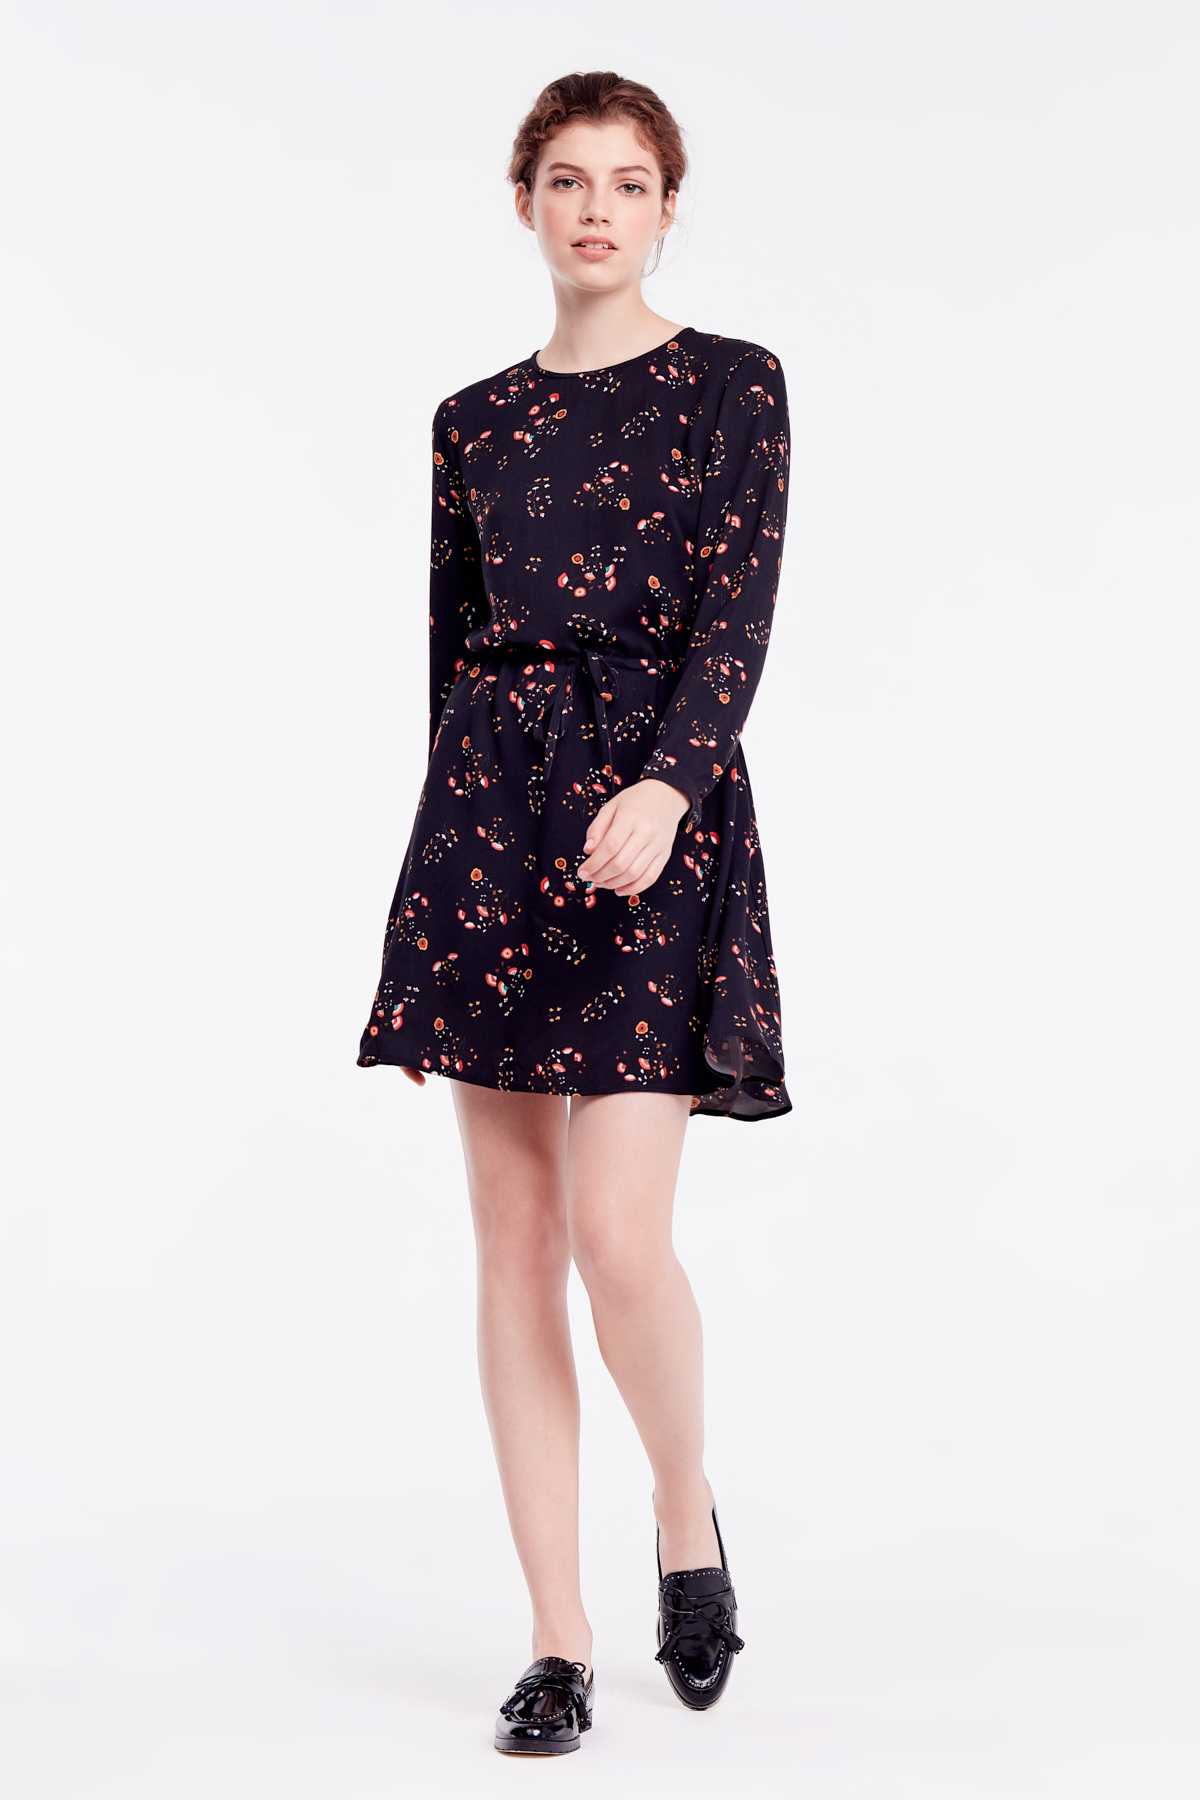 Black floral dress with straps on waist, photo 3